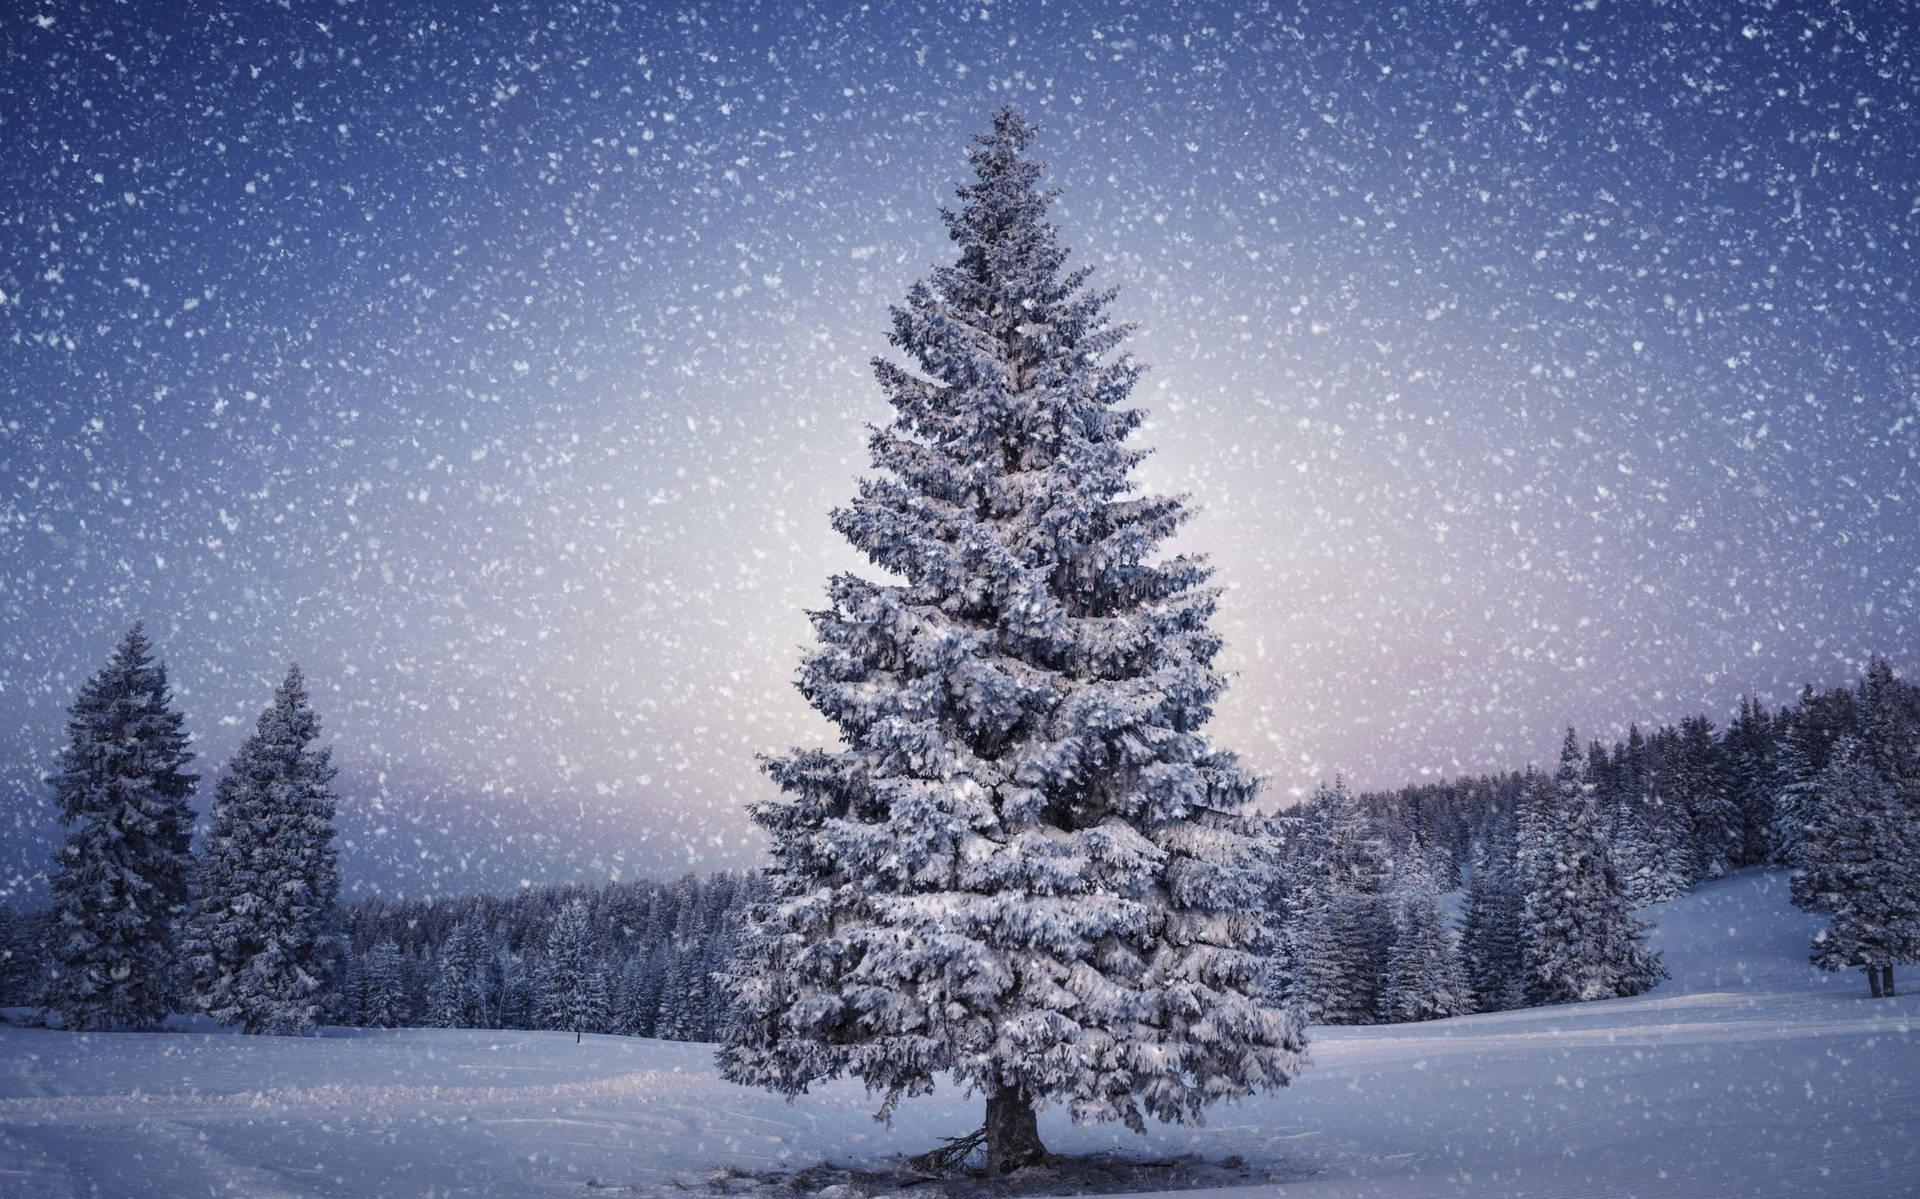 A Snowy Winter Wonderland With Majestic Christmas Tree